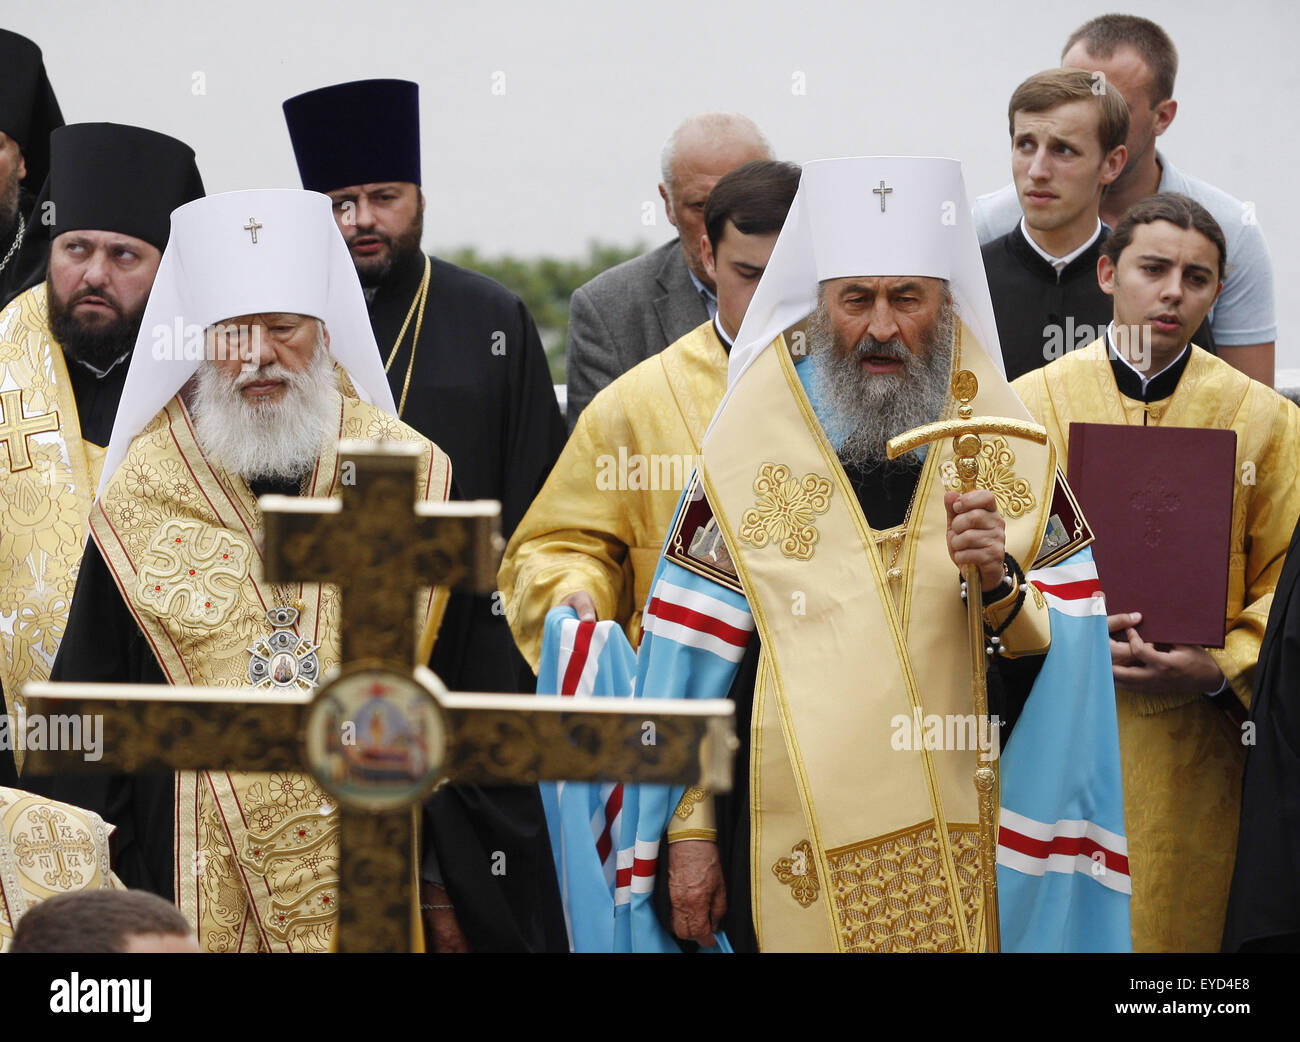 July 27, 2015 - Kiev, Ukraine - Metropolitan Onufry, head of the Ukrainian Orthodox Church of Moscow Patriarchate (3-R), participate in a prayer service marking the 1000th anniversary of the Repose of Vladimir the Great at St. Vladimirs Hill in Kiev, Ukraine, 27 July 2015. The Grand Prince of Kiev, Vladimir the Great, also known as St. Vladimir, Vladimir the Baptizer of Rus and Vladimir the Red Sun, was the first Christian ruler in the Kievan Rus who christianized the region. Orthodox believers will mark the 1027th anniversary of Kievan Rus Christianization on 28 July. (Credit Image: © Serg Gl Stock Photo